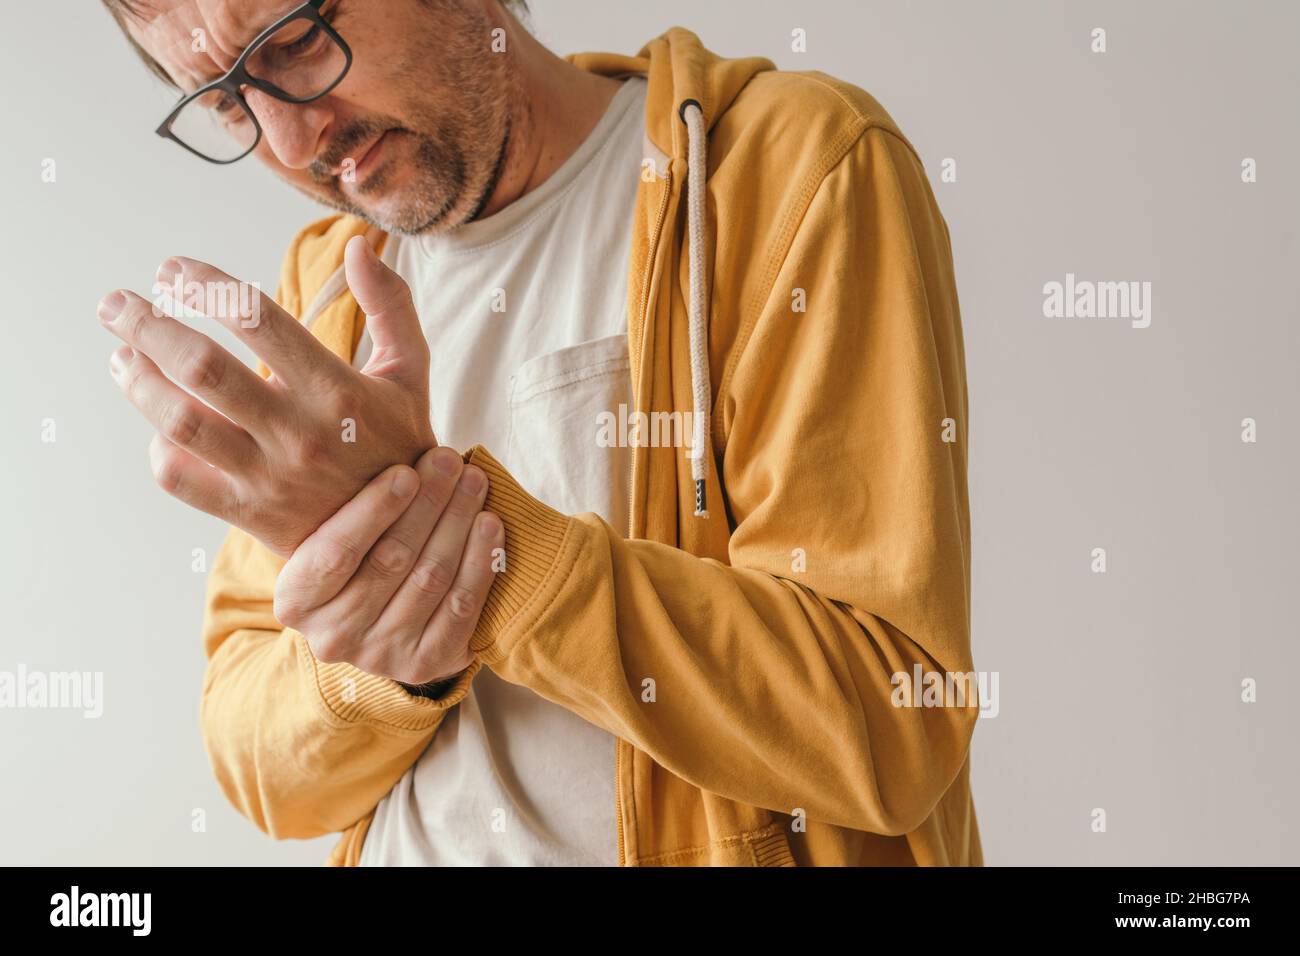 Aching wrist pain as symptom of tendonitis or arthritis, adult caucasian male with painful grimace looking down at his joint Stock Photo